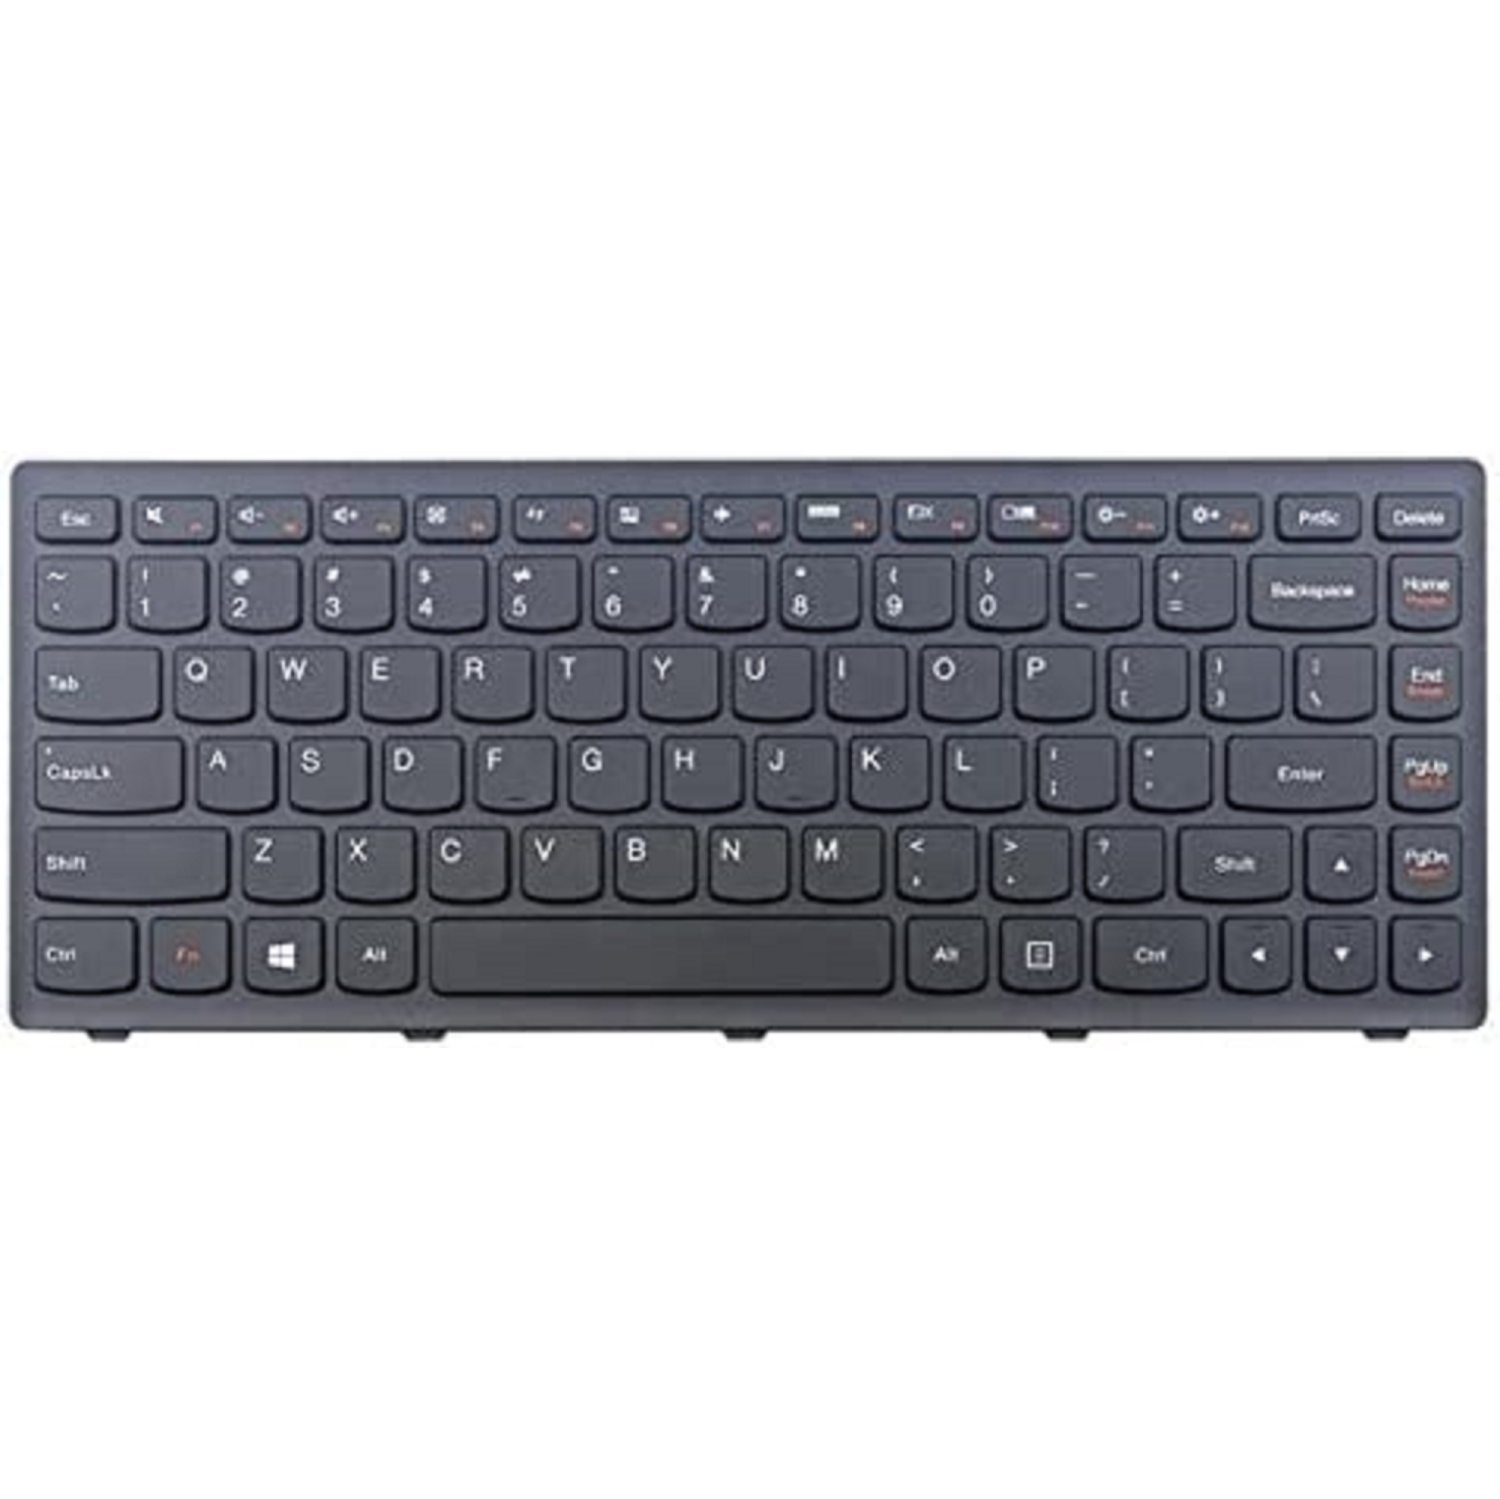 Replacement Keyboard for Lenovo Ideapad Flex 5-14ALC05 5-14ARE05 5-14IIL05 5-14ITL05 Yoga Slim 7-14ARE05 7-14IIL05 7-14ITL05